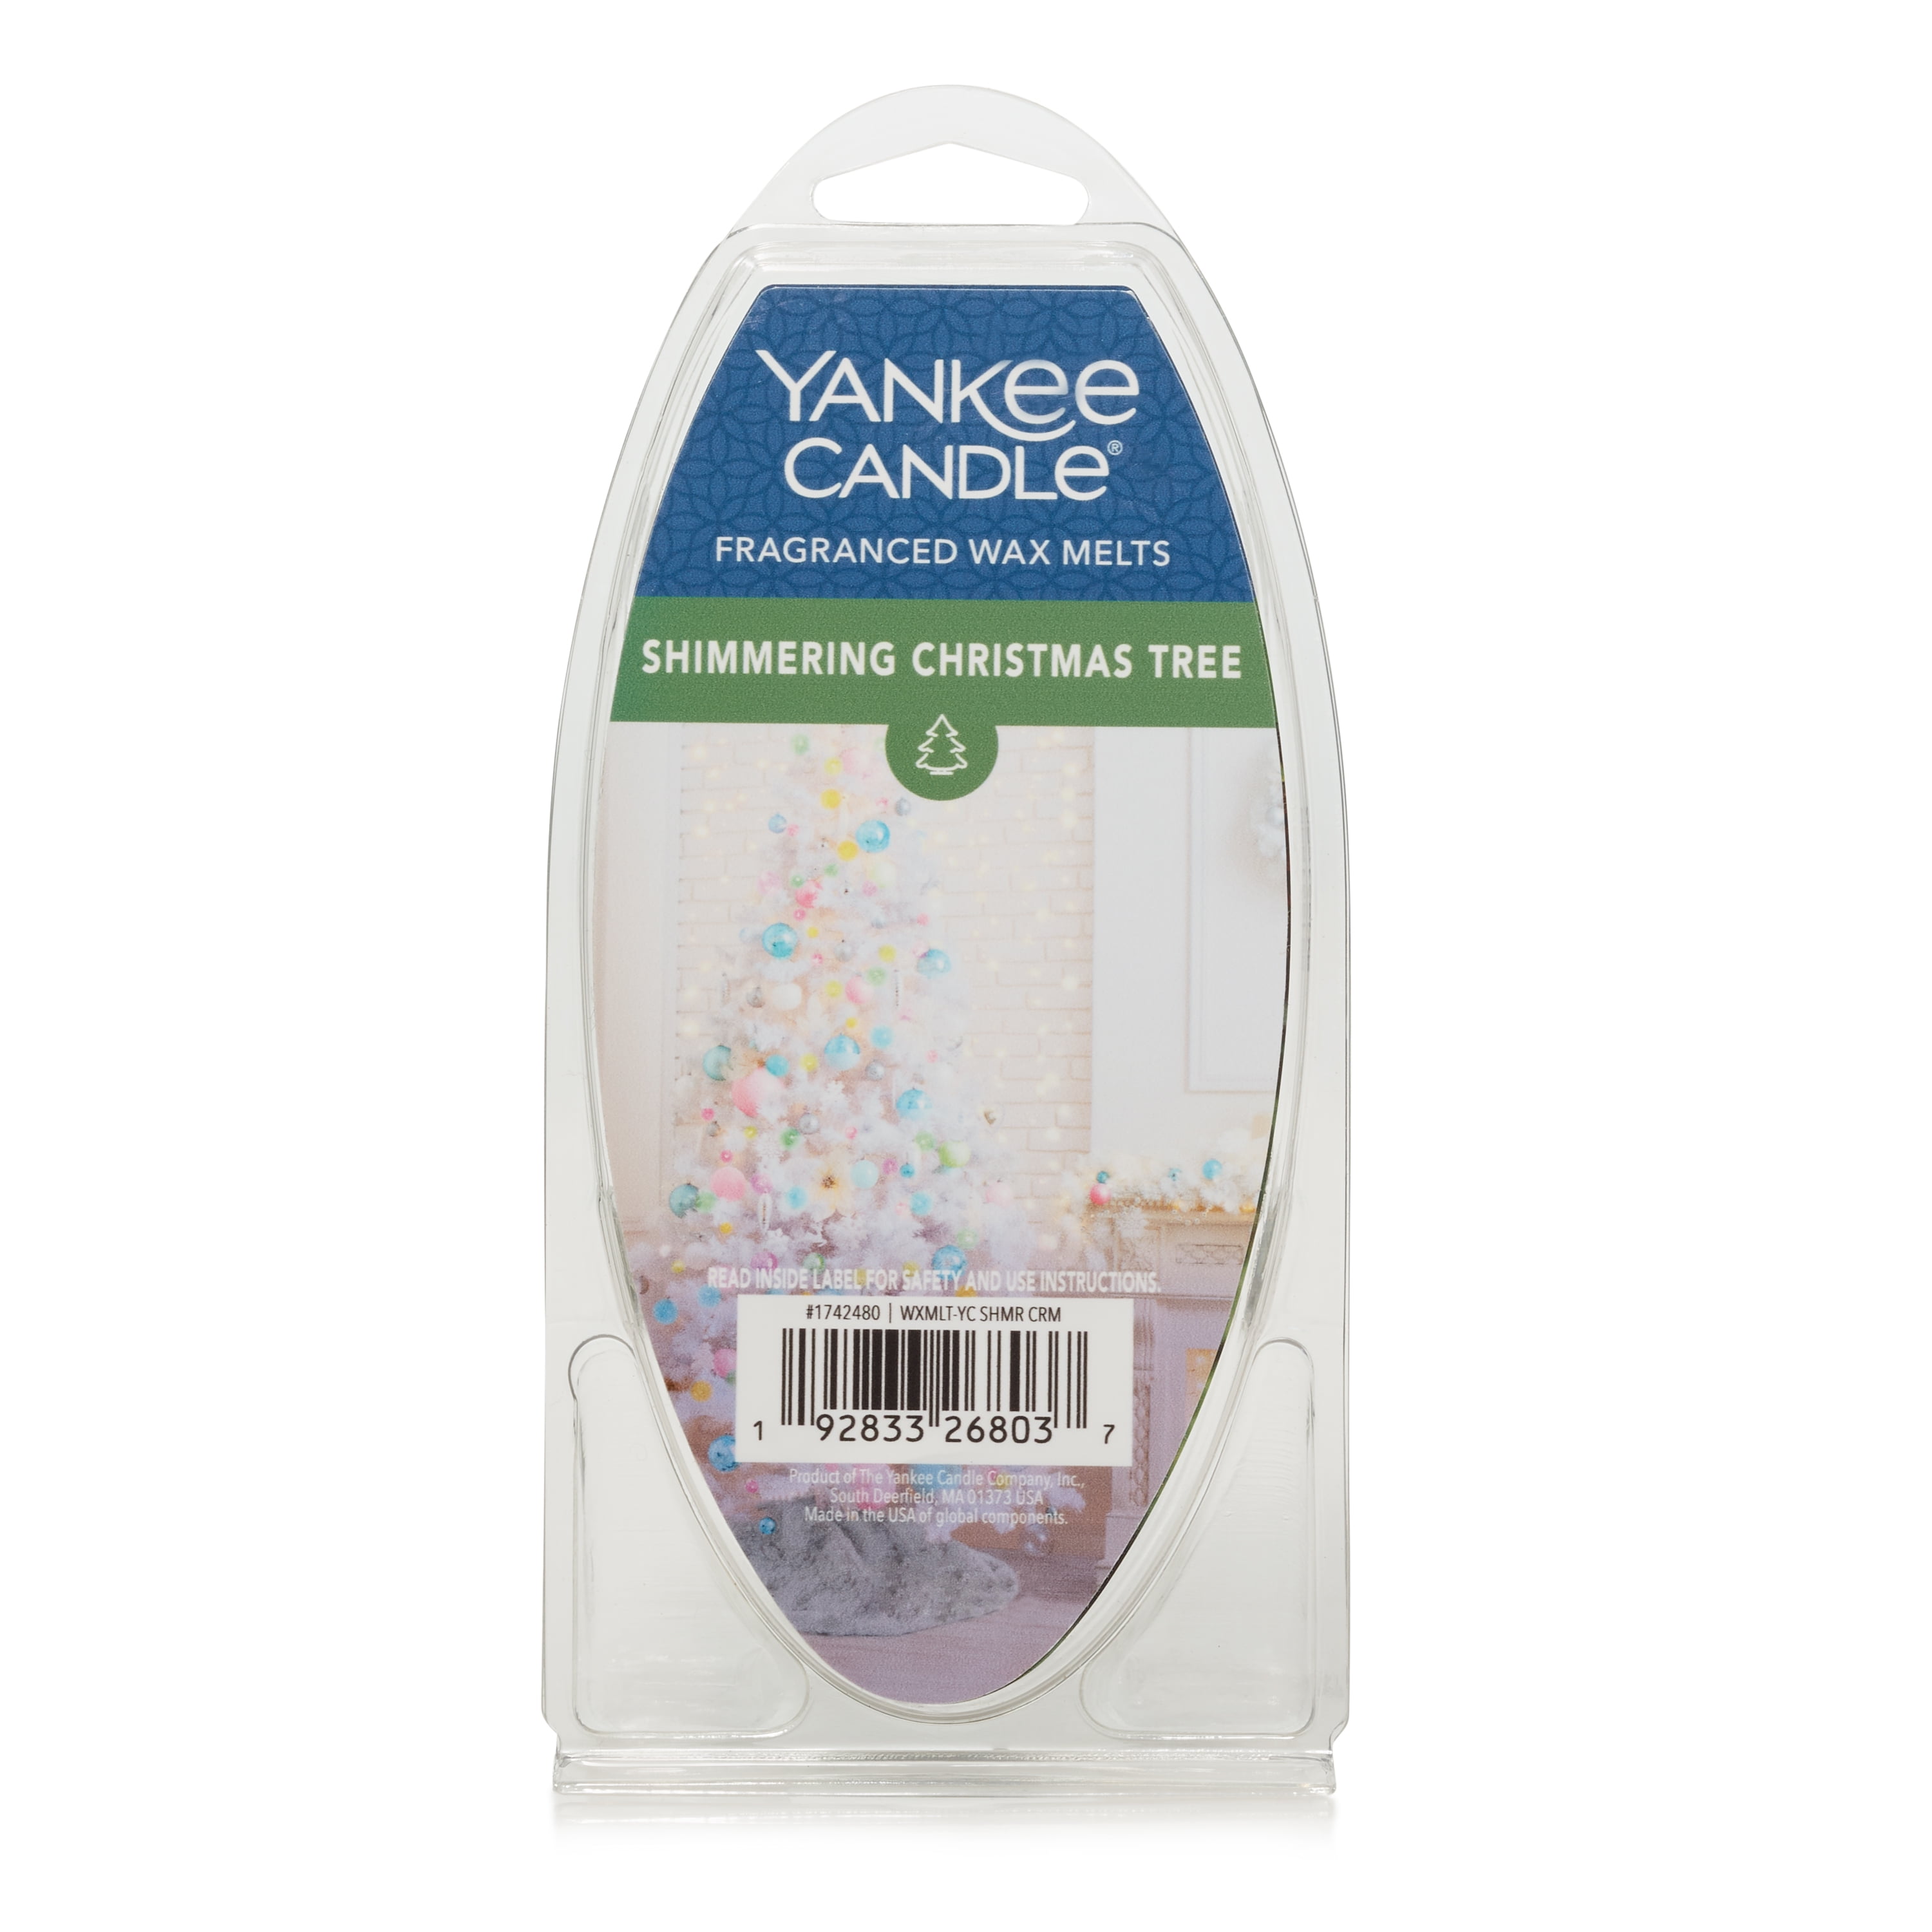 Bass Pro Shops - This just in - Yankee Candles! We have 5 great scents to  choose from in the candle form. We also have wax melts for $5.99 in Pink  Sands